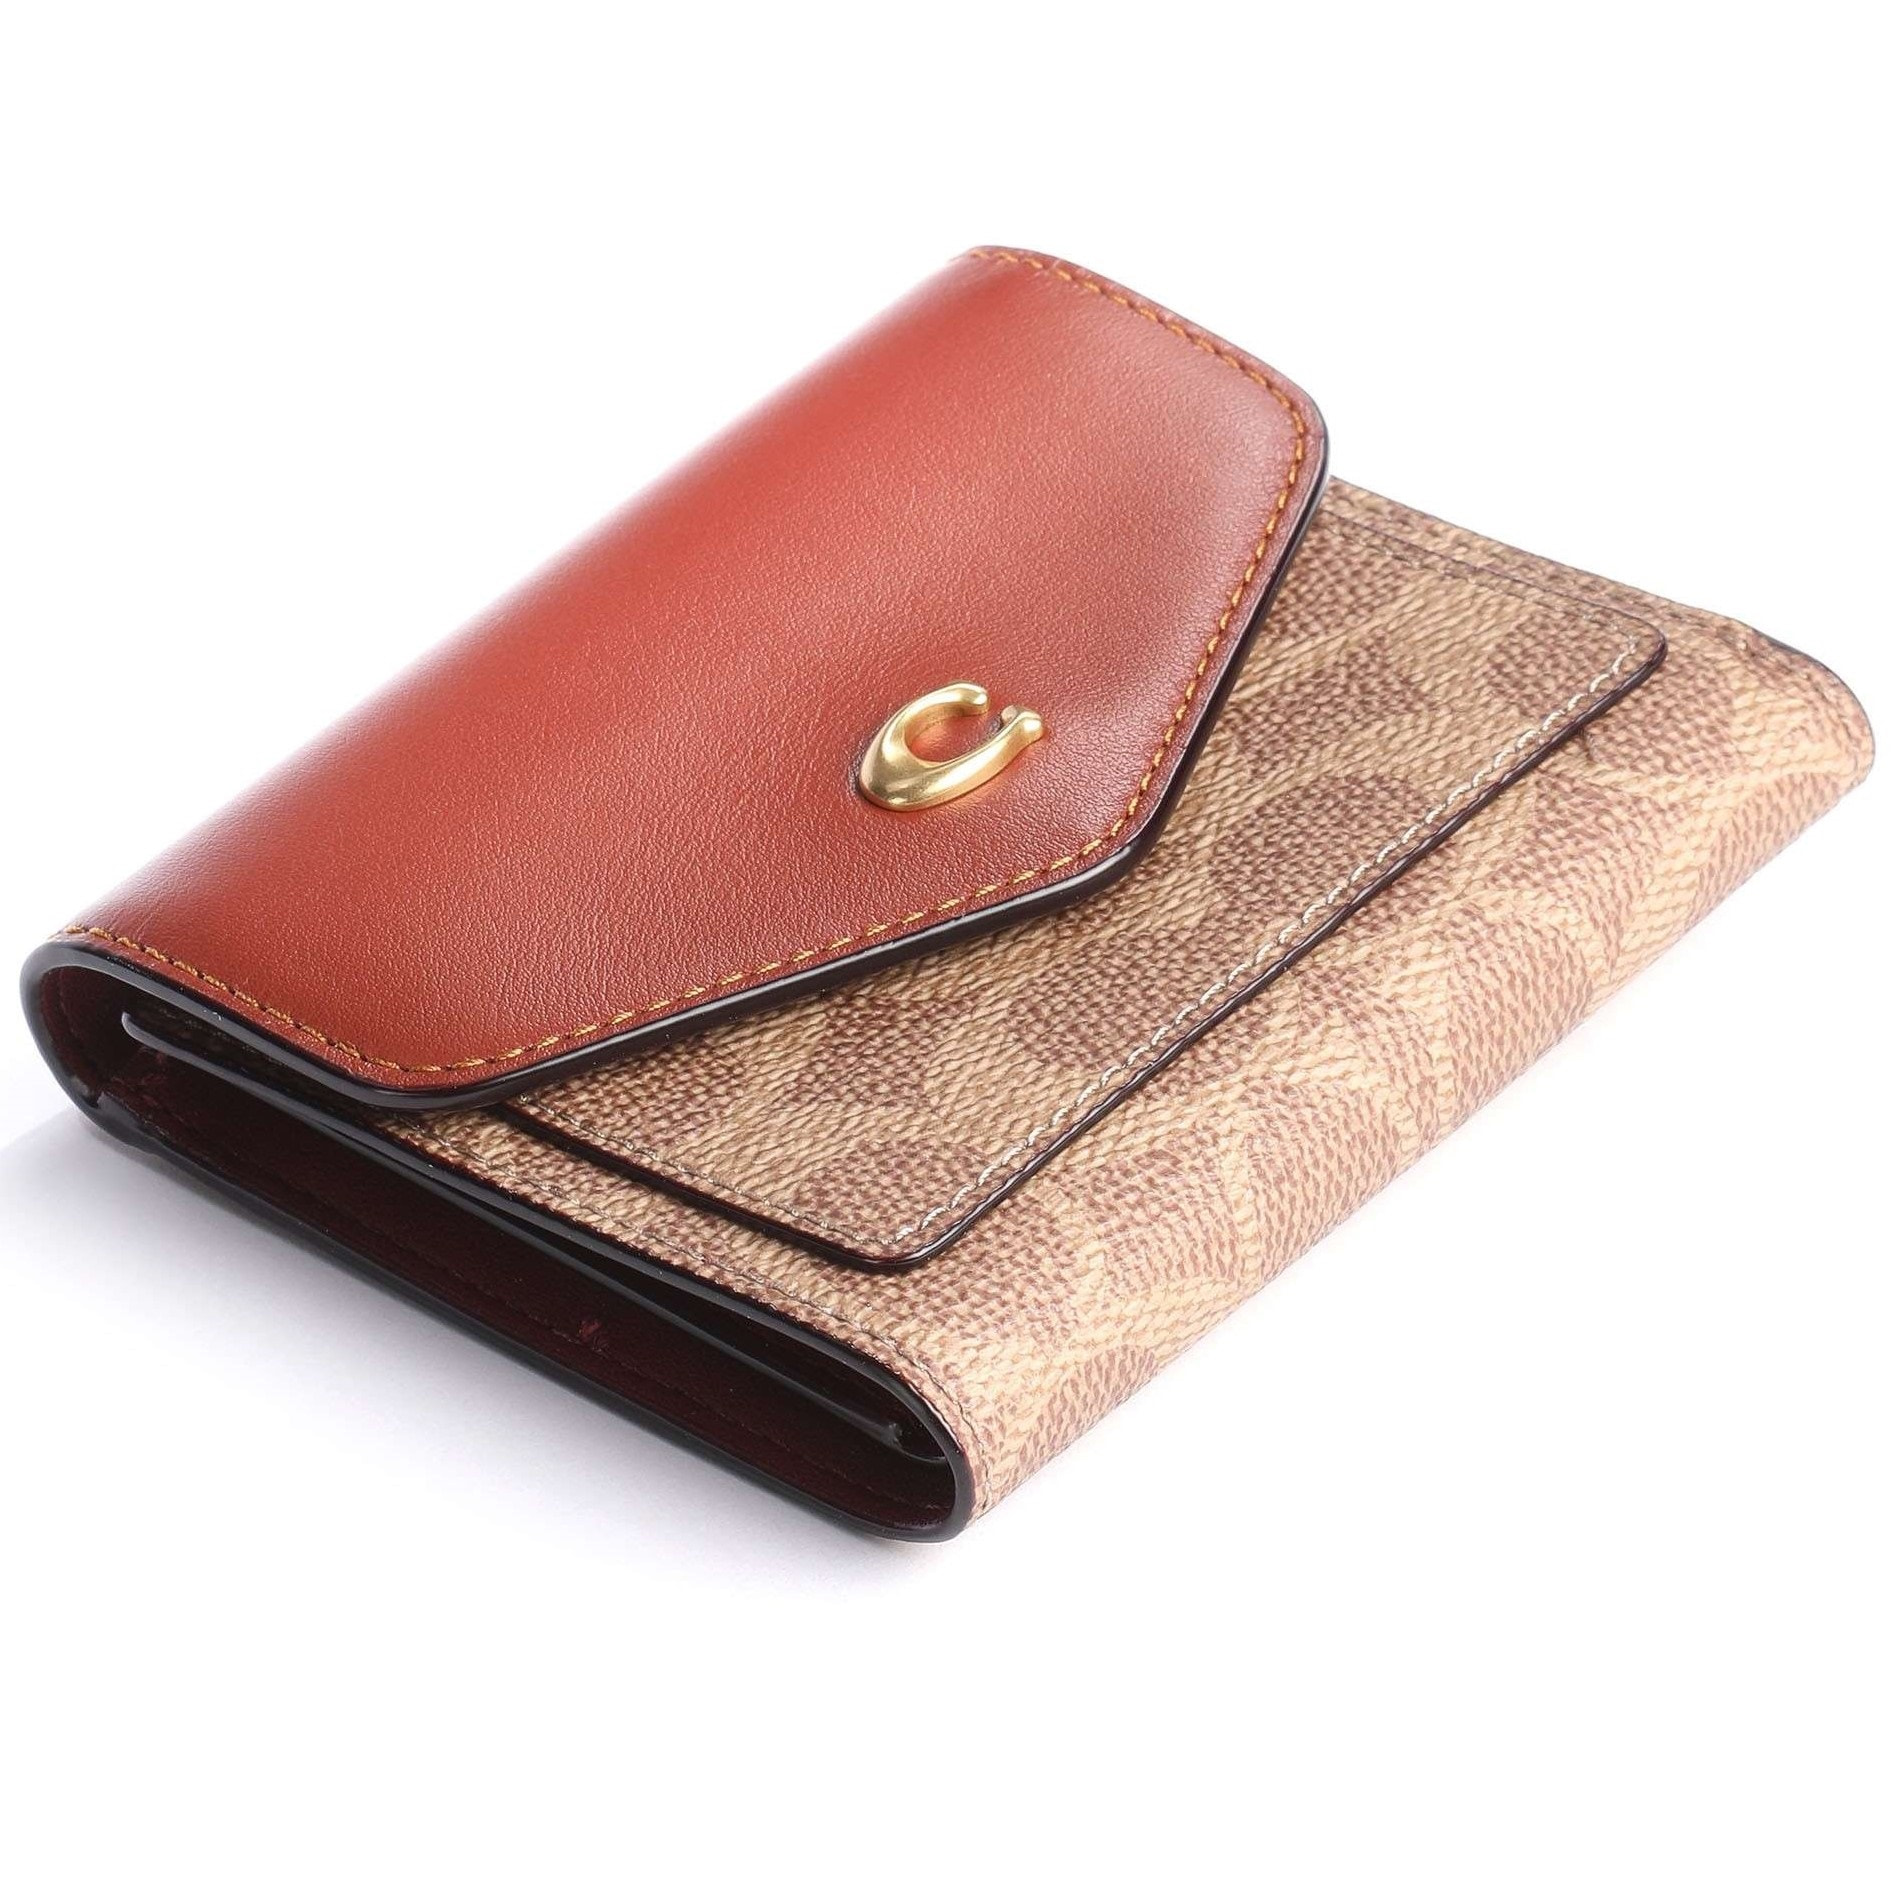 VÍ NỮ NGẮN NẤP GẬP COACH WYN SMALL WALLET IN COLORBLOCK SIGNATURE CANVAS C2329 1